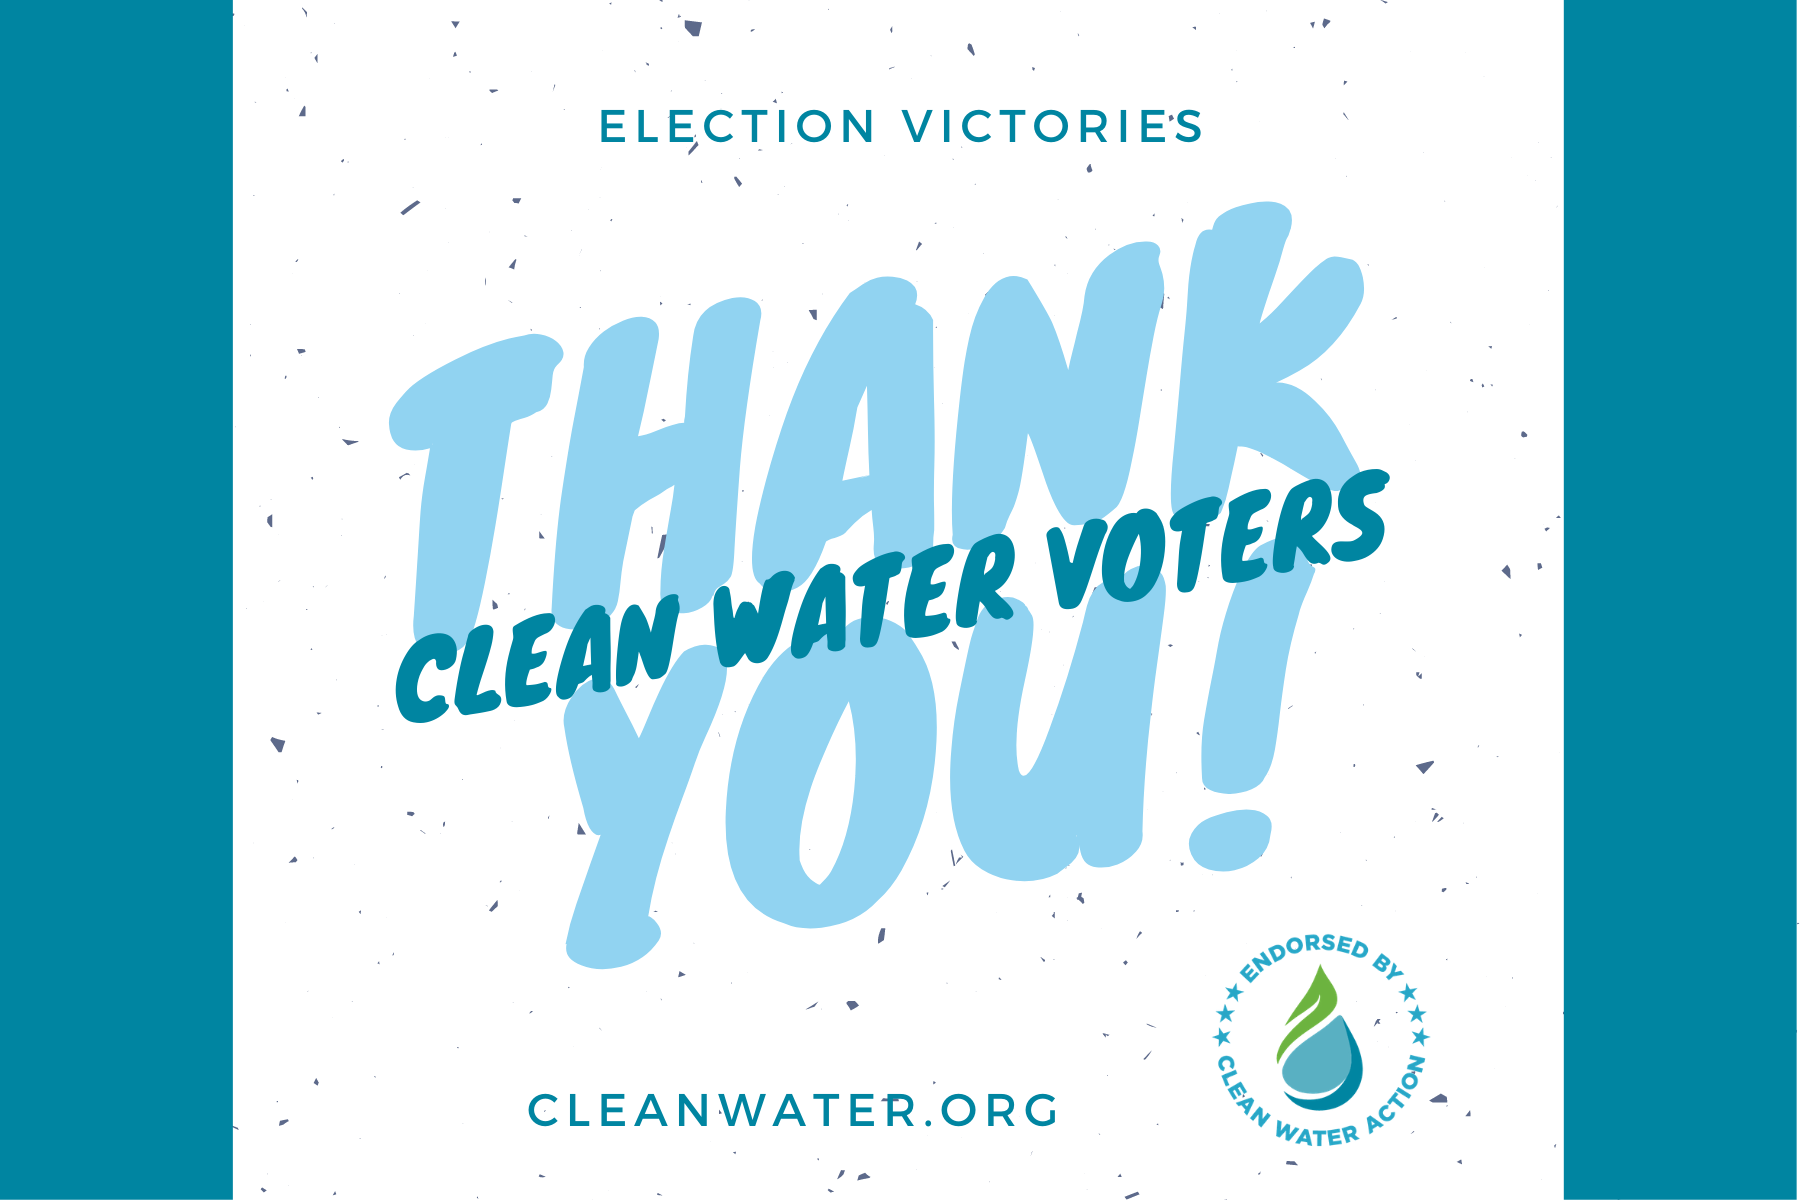 Thank You Clean Water Voters!